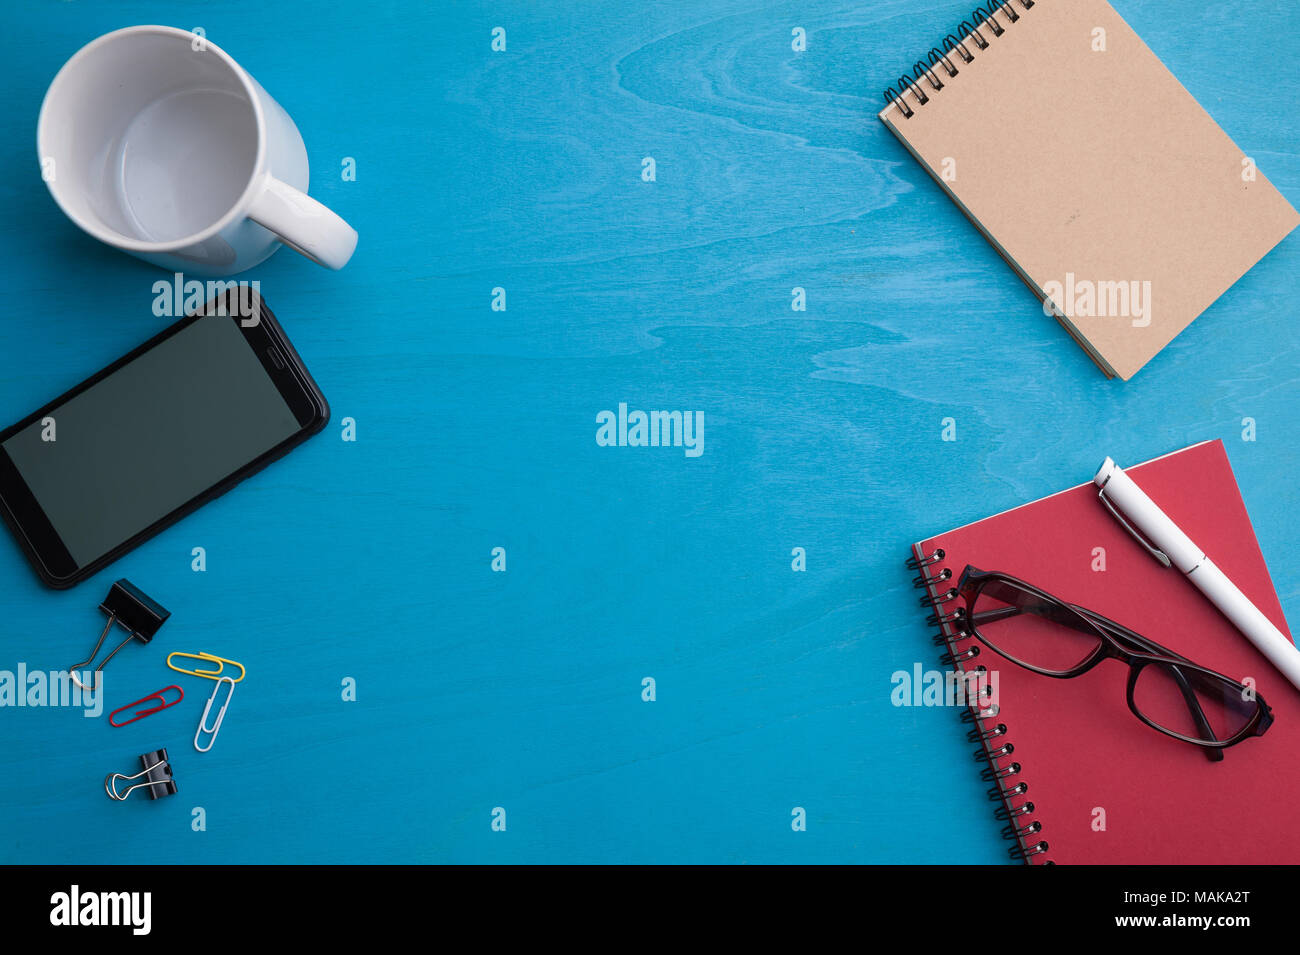 Smart phone, small notebook, glasses, and coffee cup on blue wood table. background with blank area for text or message. Stock Photo